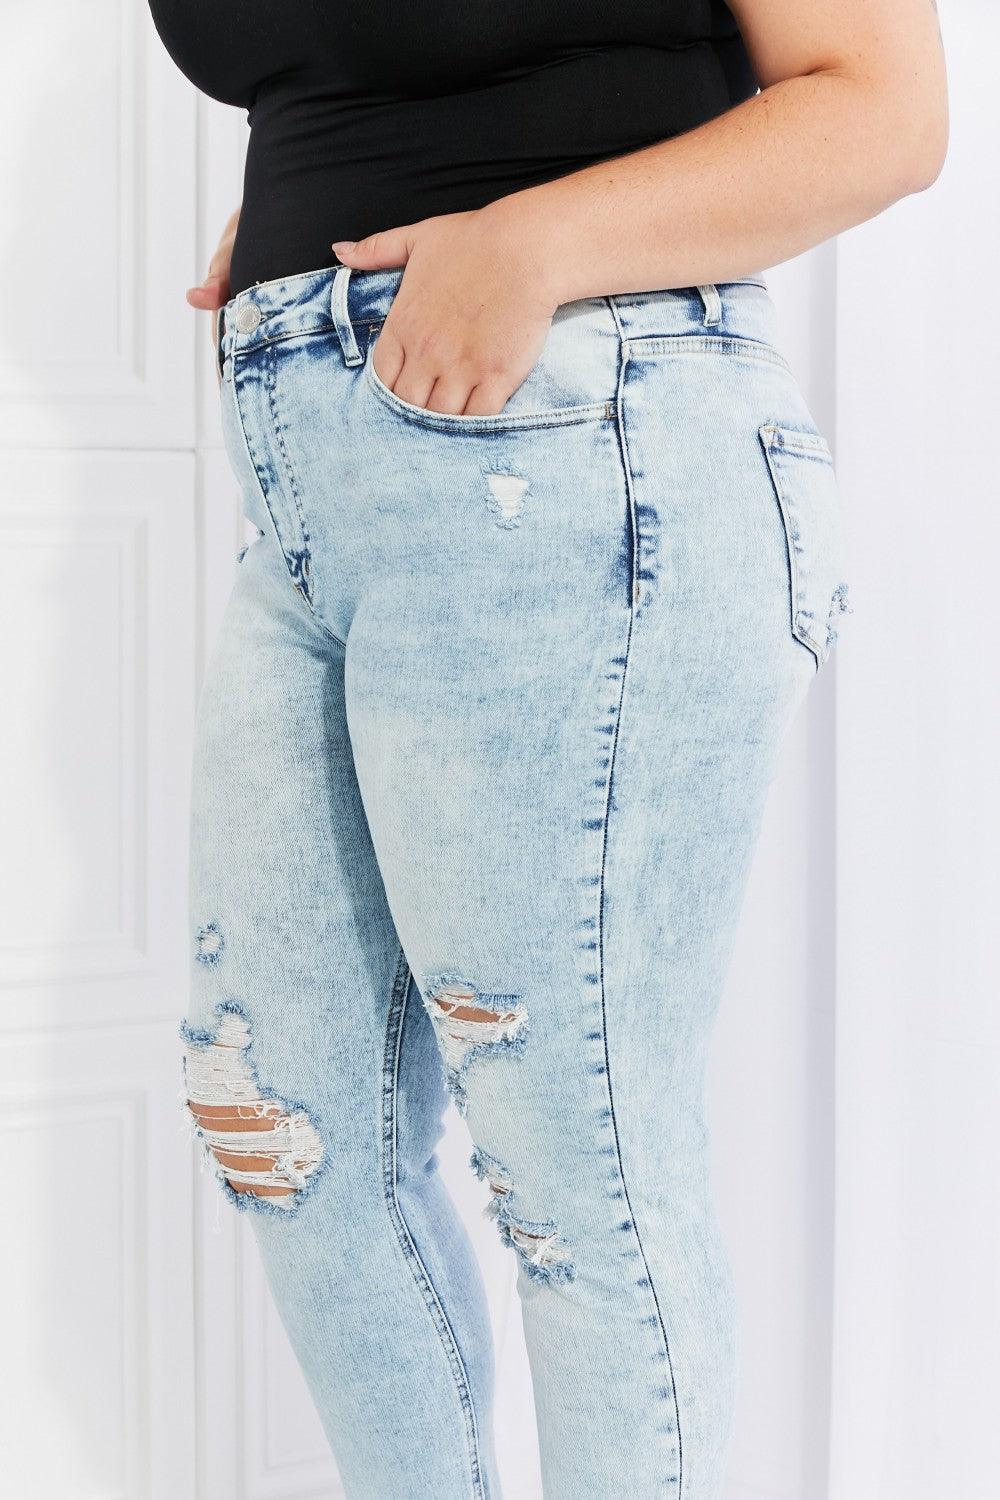 VERVET On The Road Full Size Distressed Jeans - The Fiery Jasmine